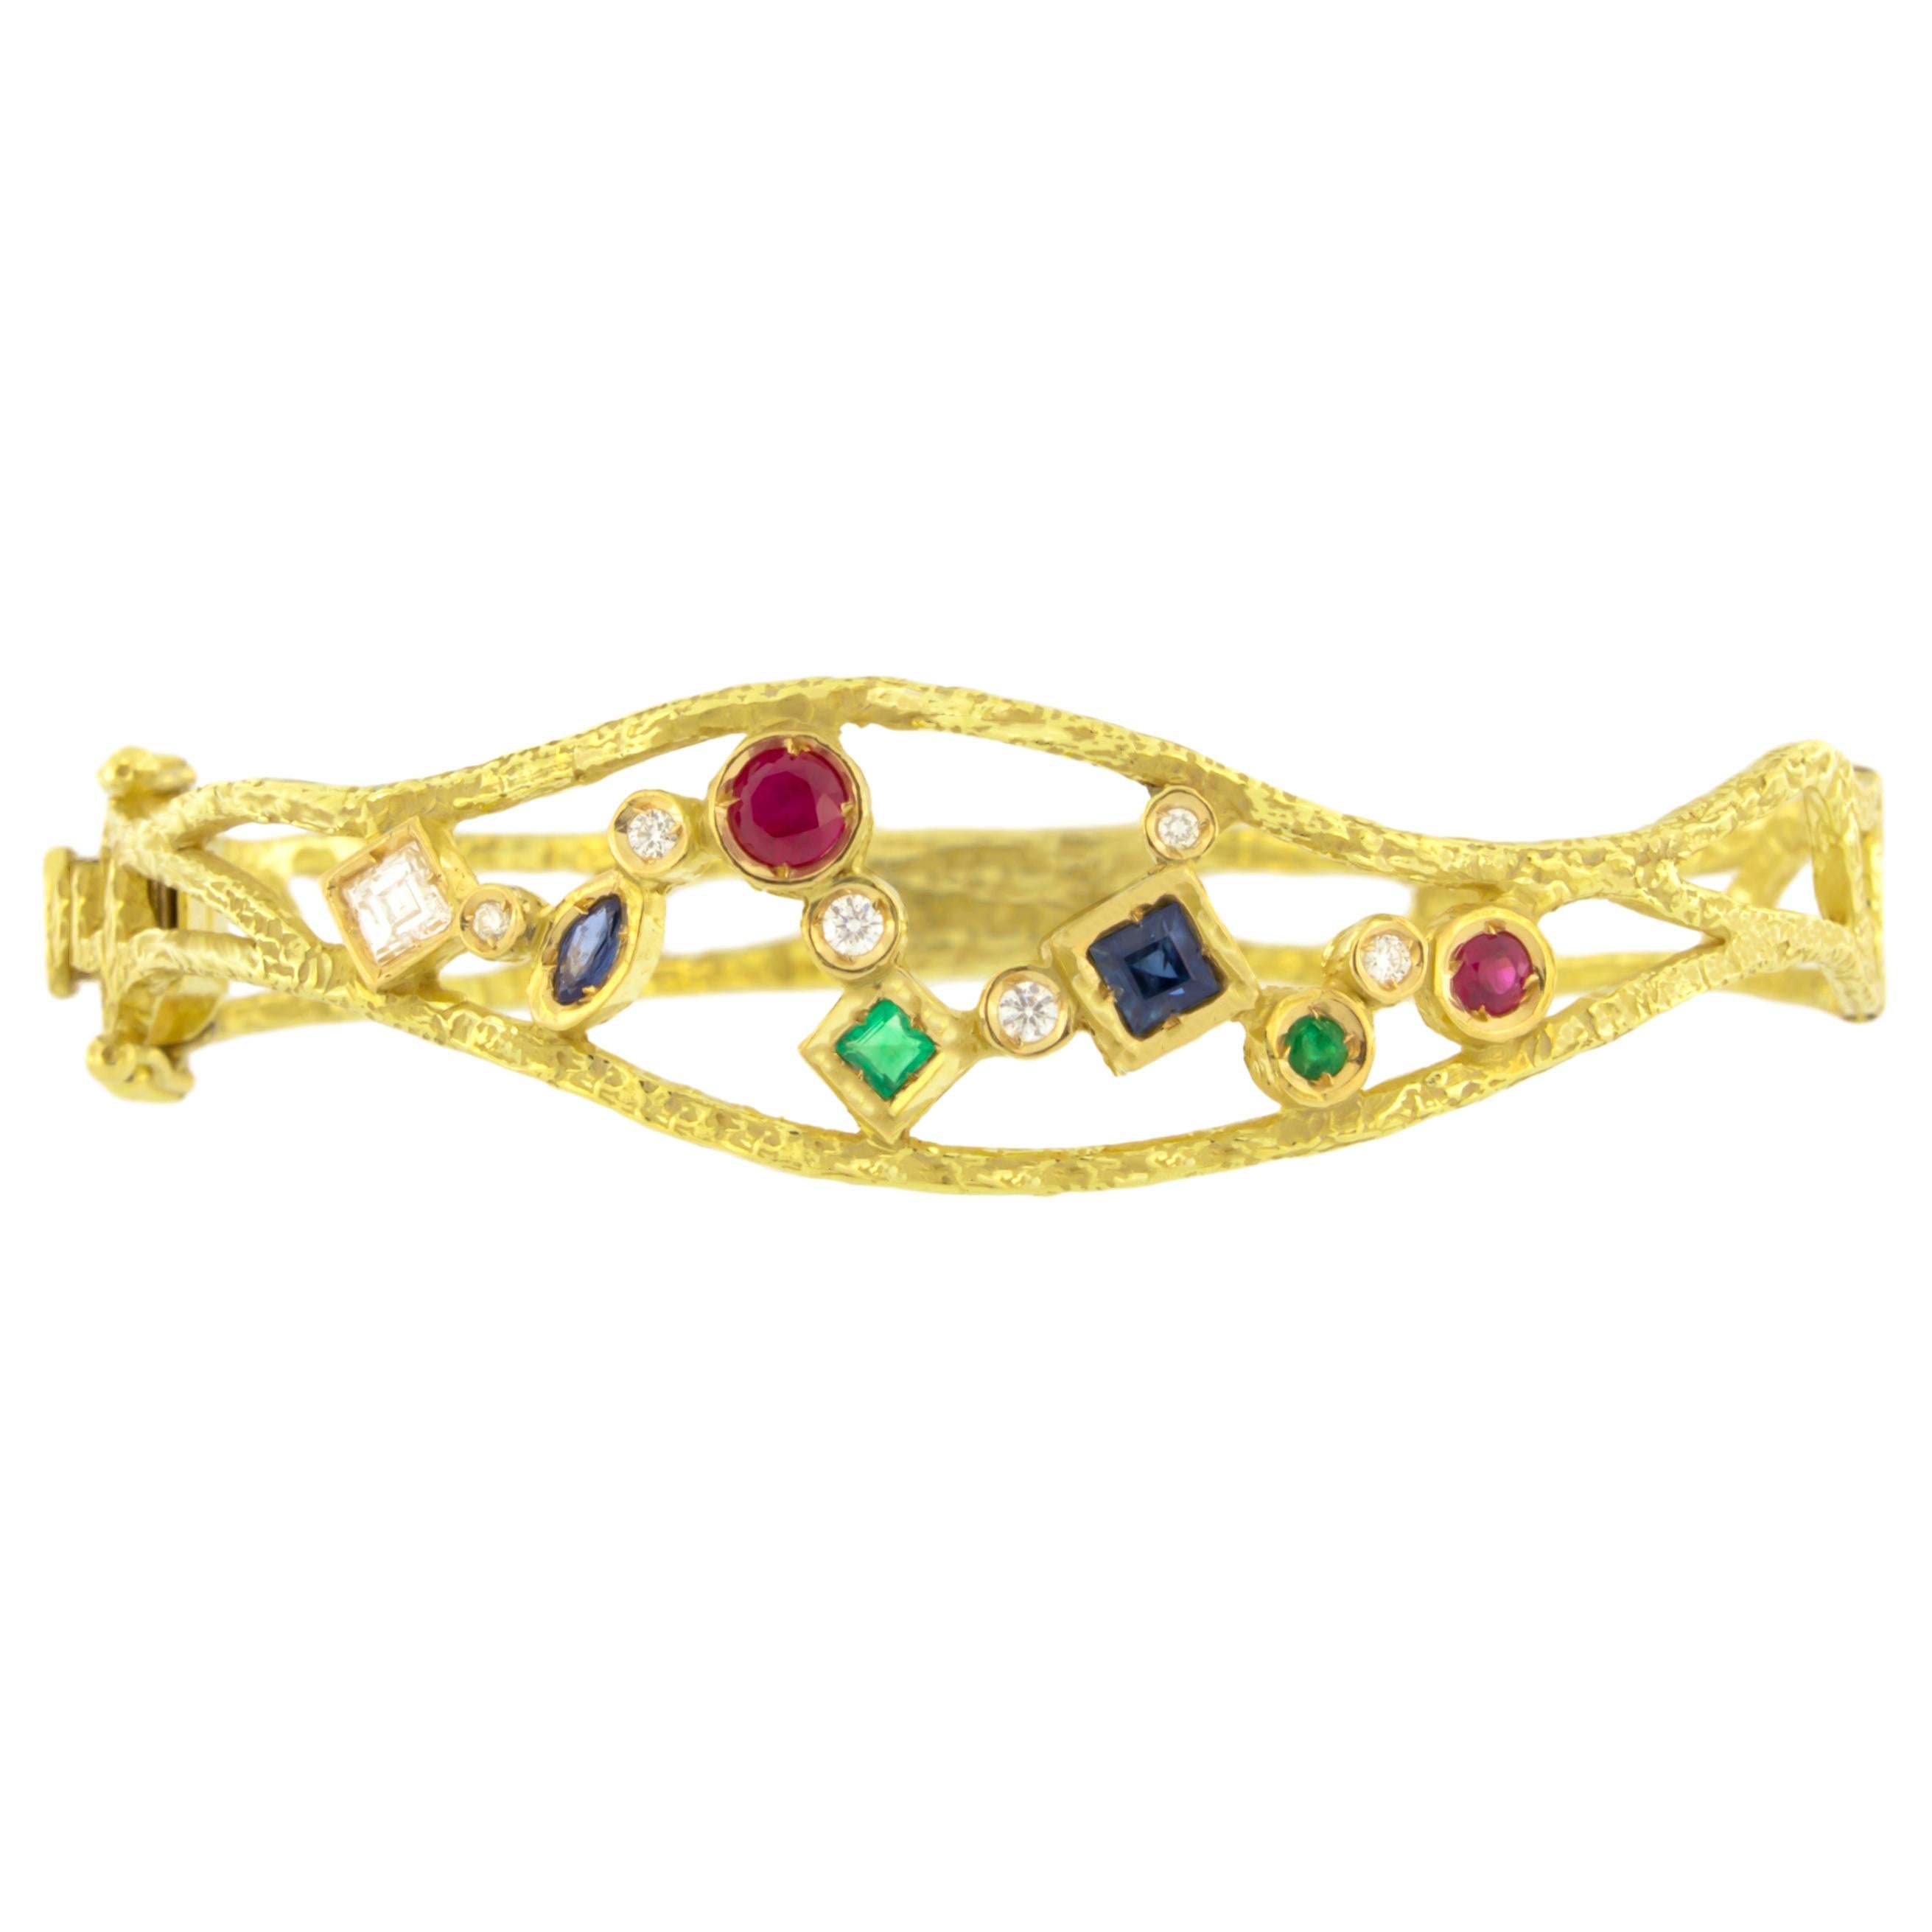 Elegant Multi-Color Precious Gemstones Satin Yellow Gold Cuff Bracelet, hand-crafted with lost-wax casting technique.

Lost-wax casting, one of the oldest techniques for creating jewelry, forms the basis of Sacchi's jewelry production. Modelling wax